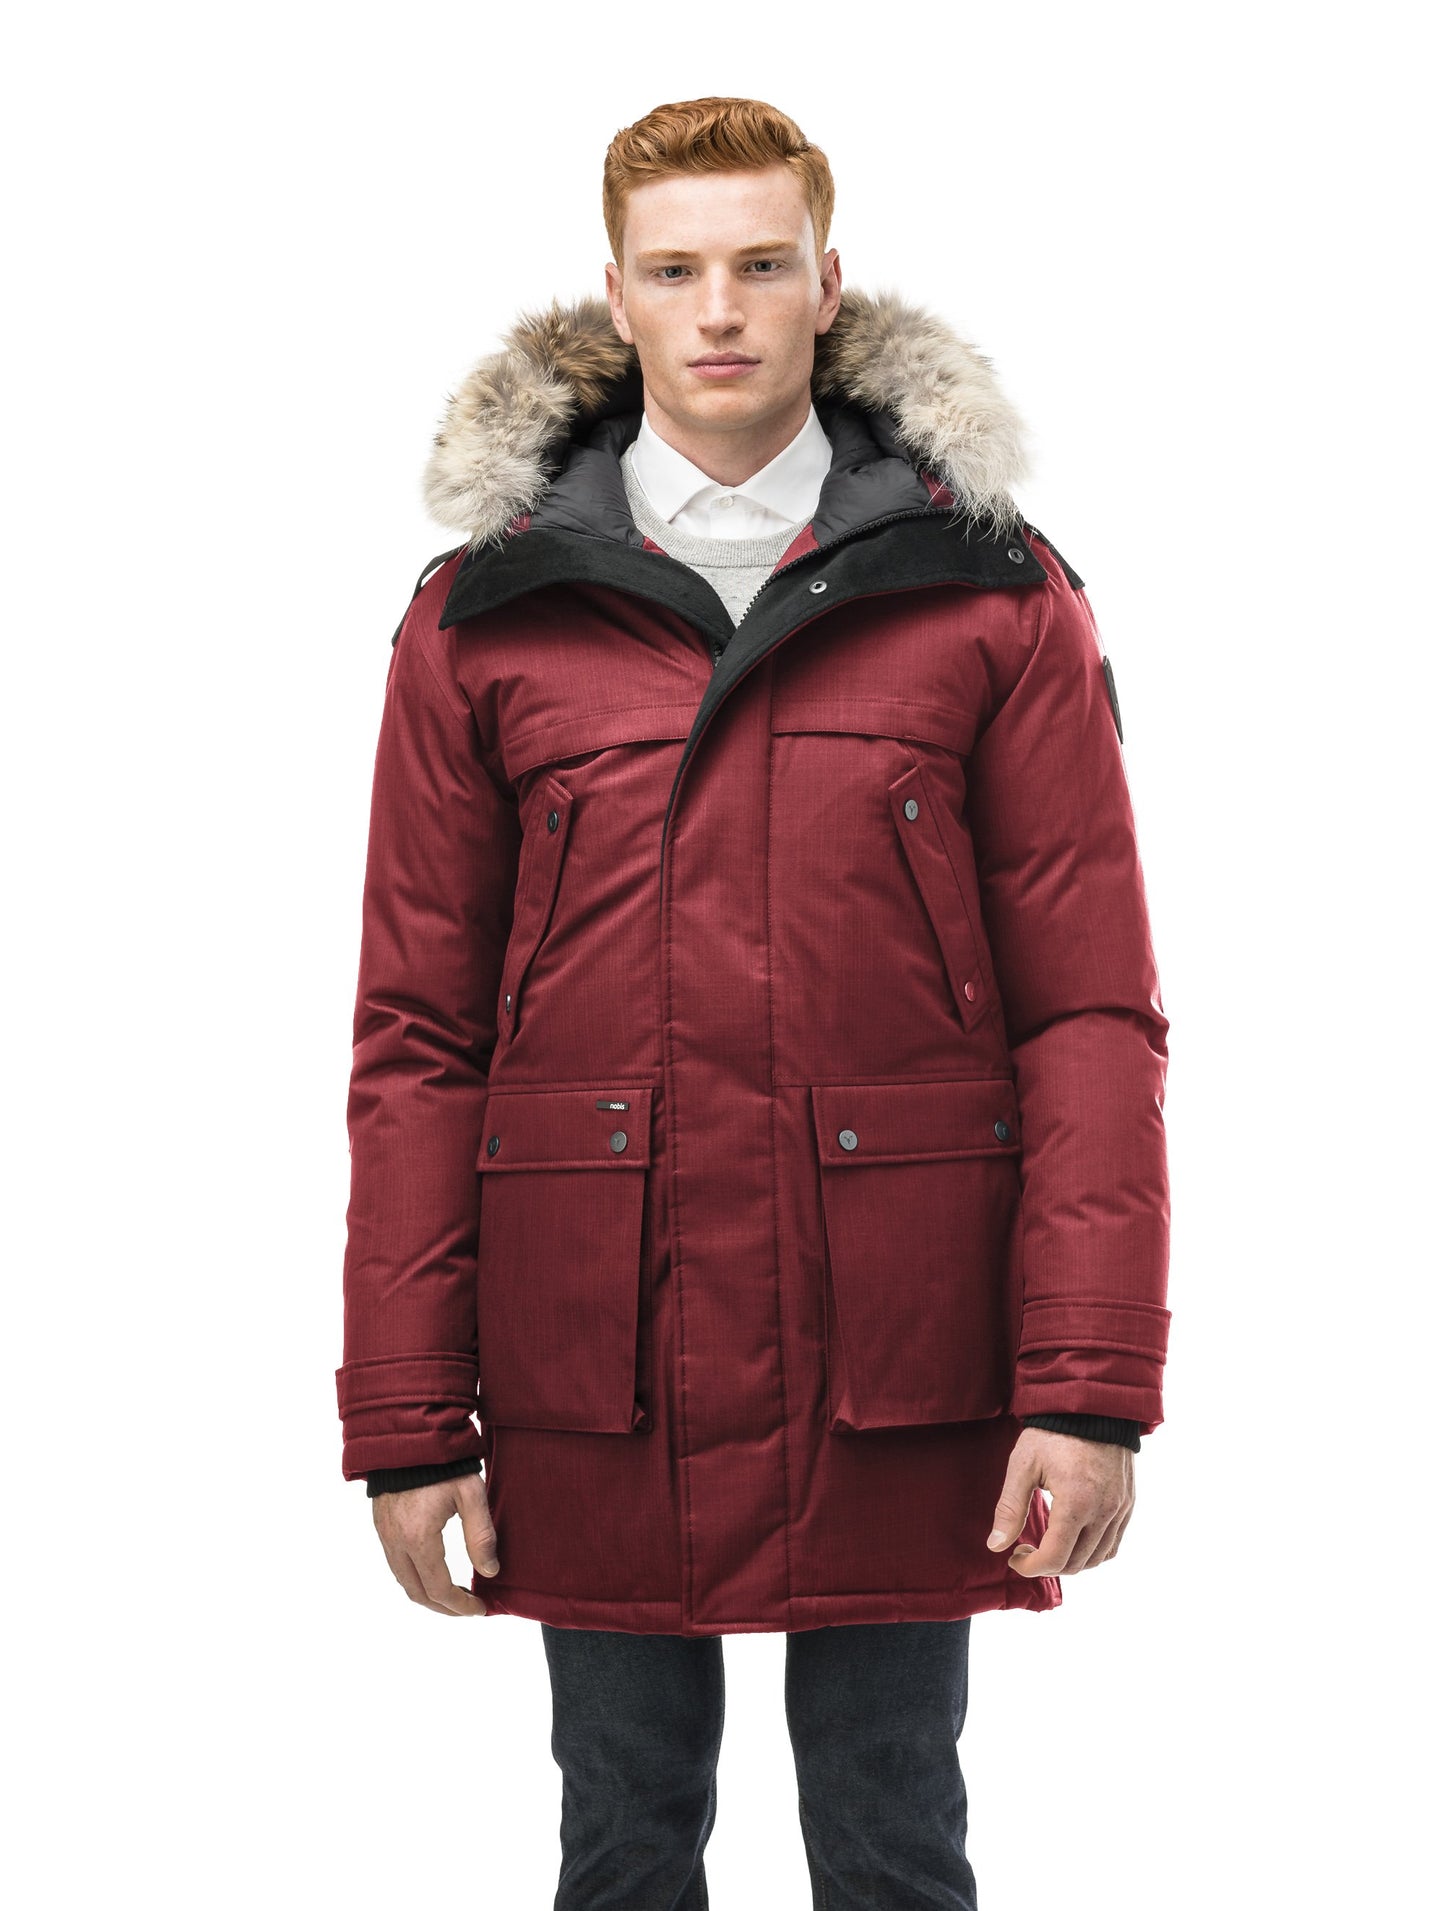 Men's Best Selling Parka the Yatesy is a down filled jacket with a zipper closure and magnetic placket in CH Cabernet